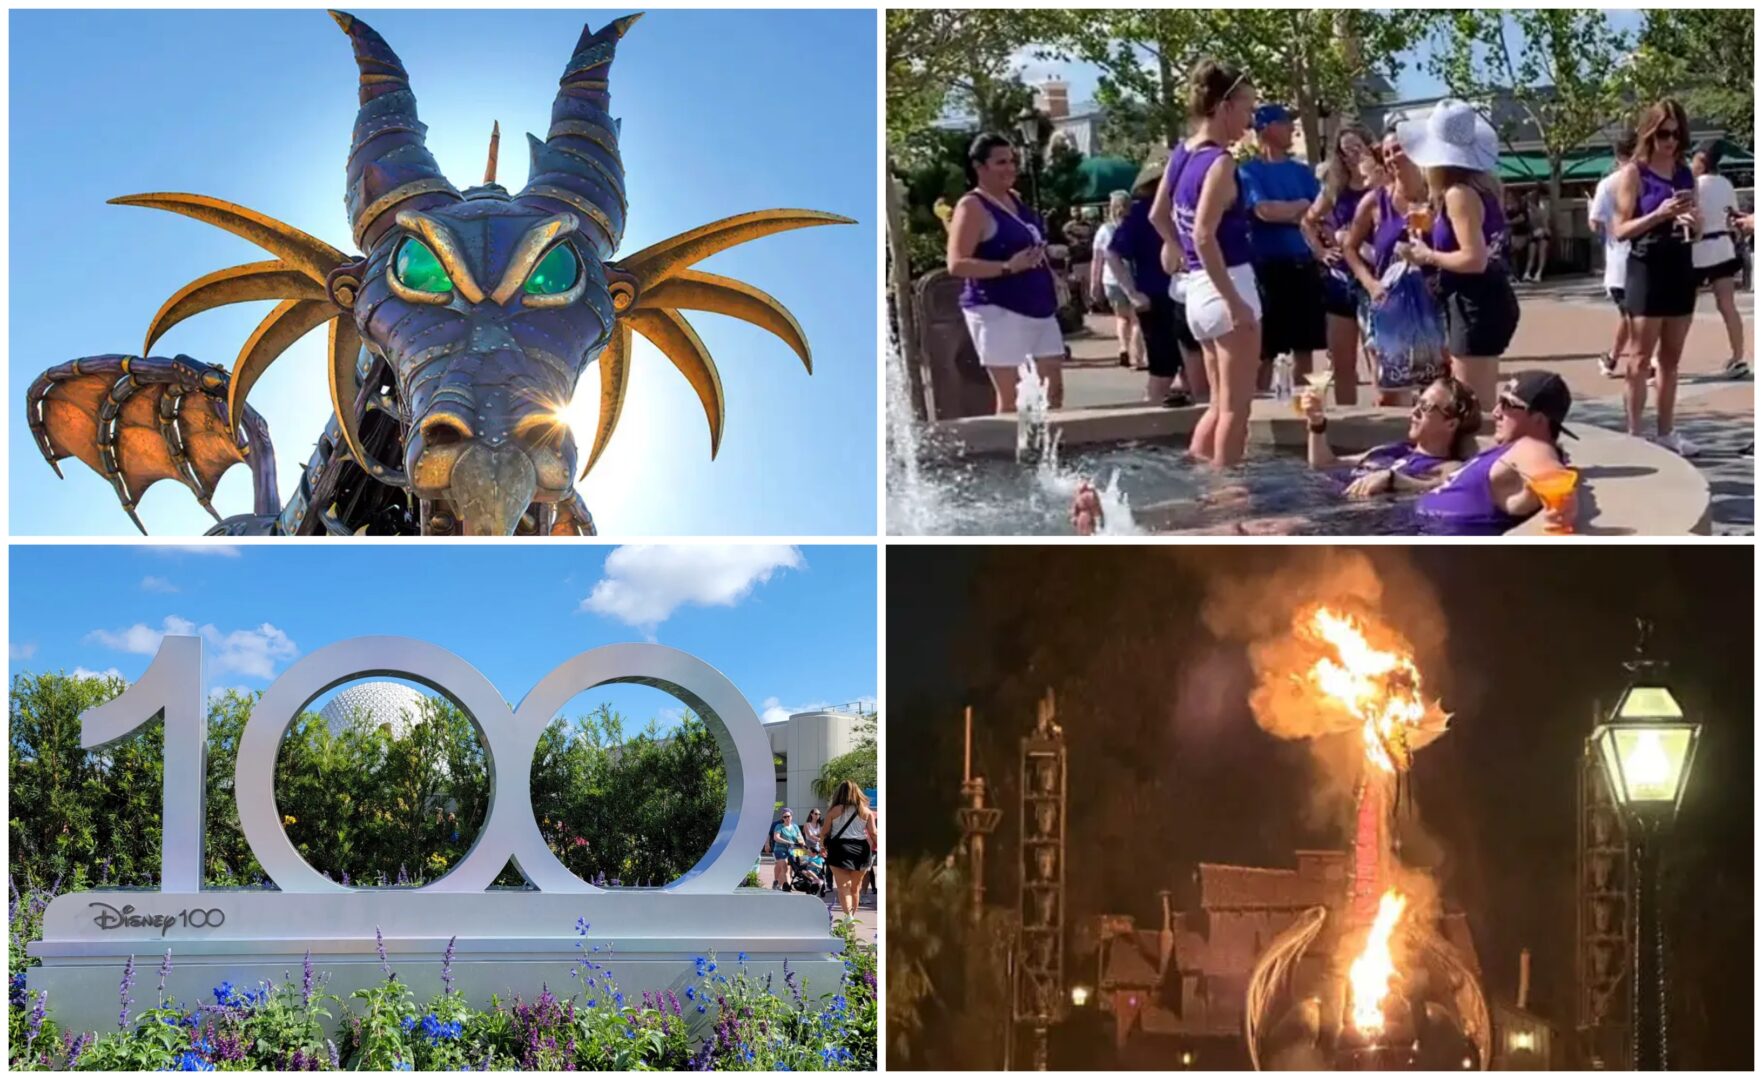 Disney News Highlights: Cheerleader Parents Turn France Pavilion Fountain Into Pool Party, Fantasmic Fire in Disneyland, Universal Raising Annual Pass Prices